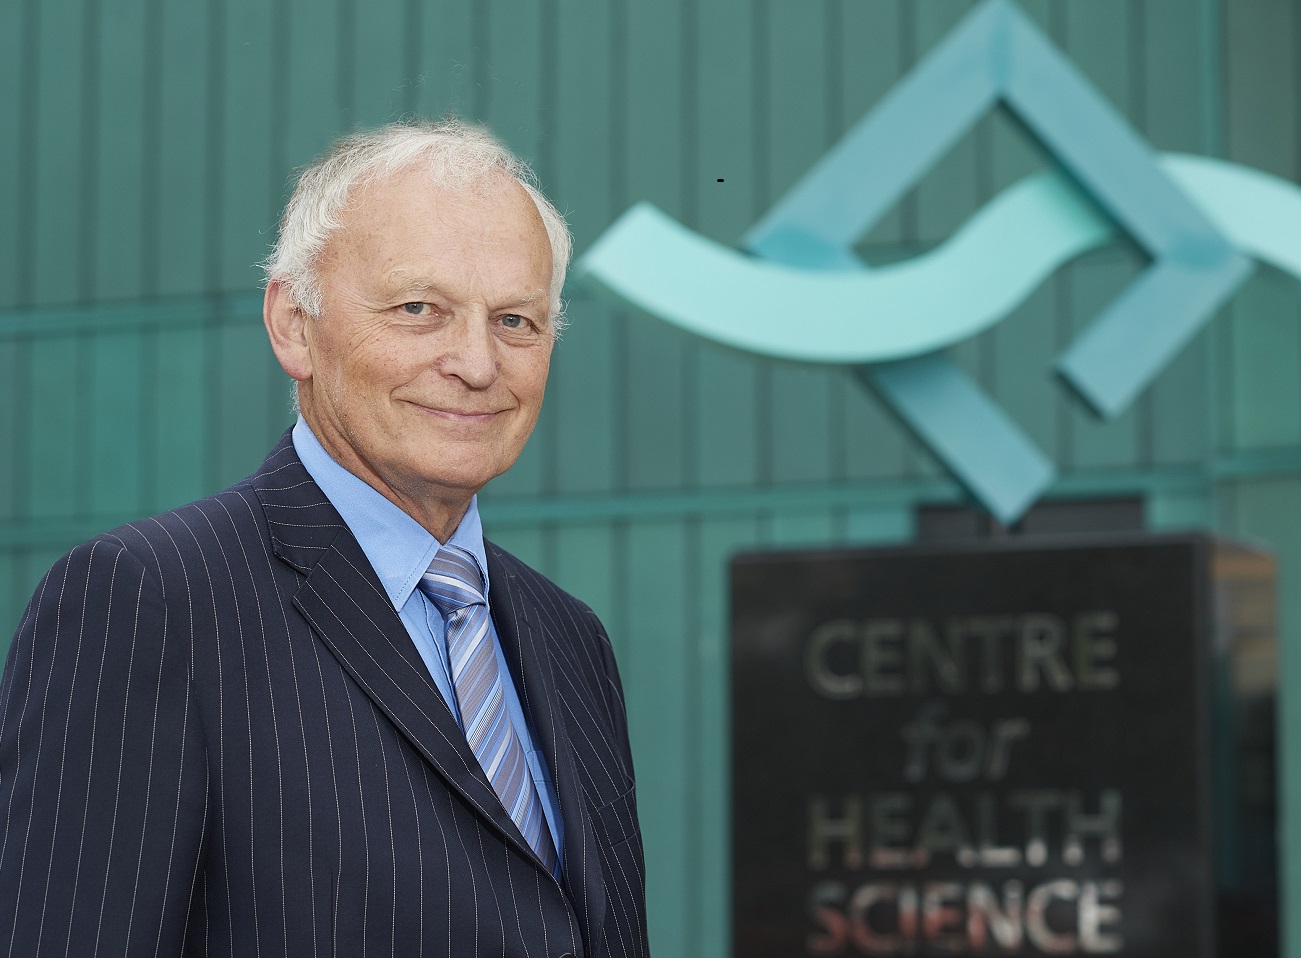 Committed healthcare innovator receives honorary fellowship from the University of the Highlands and Islands